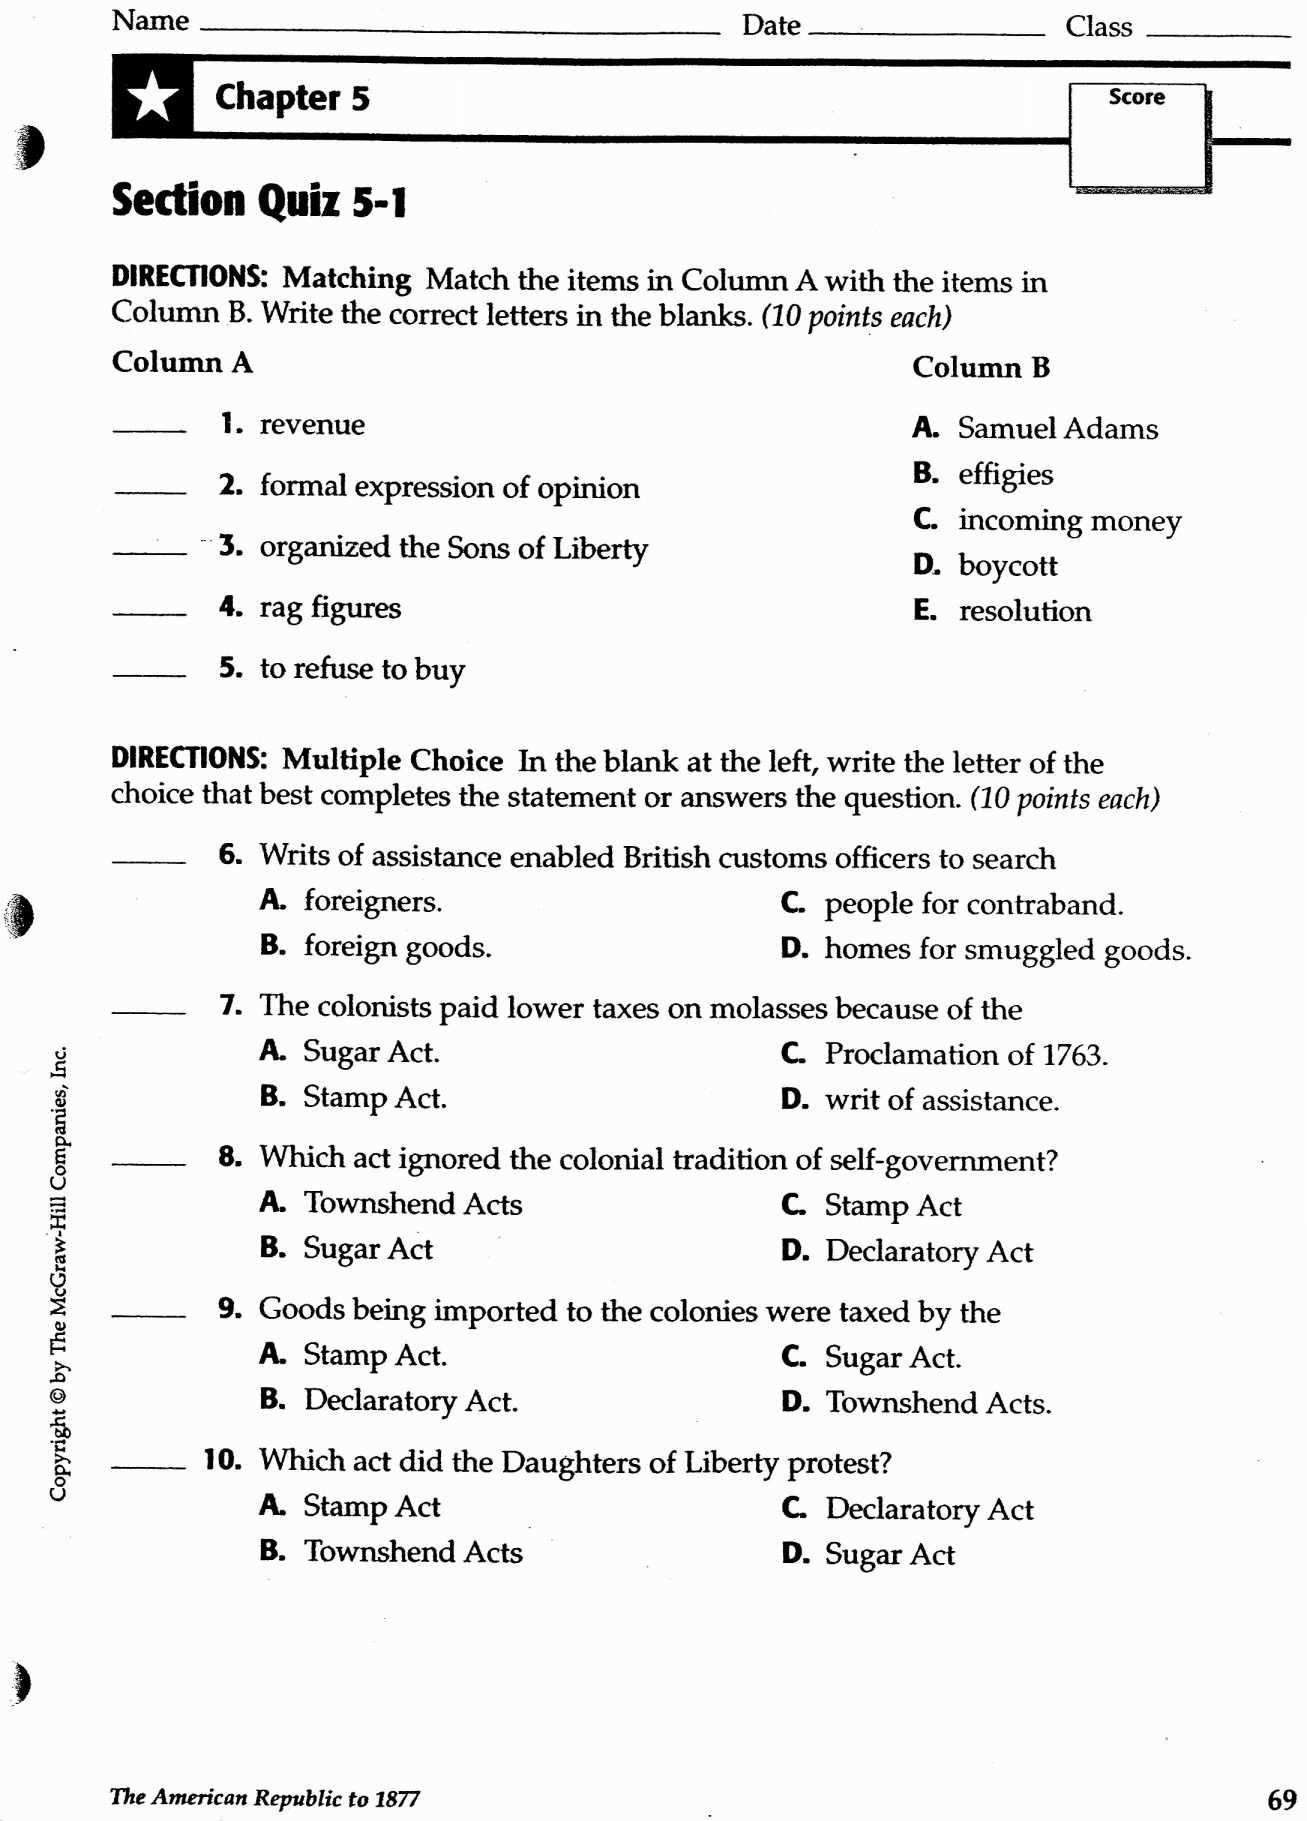 The Organization Of Congress Chapter 5 Worksheet Answers With The Organization Of Congress Chapter 5 Worksheet Answers